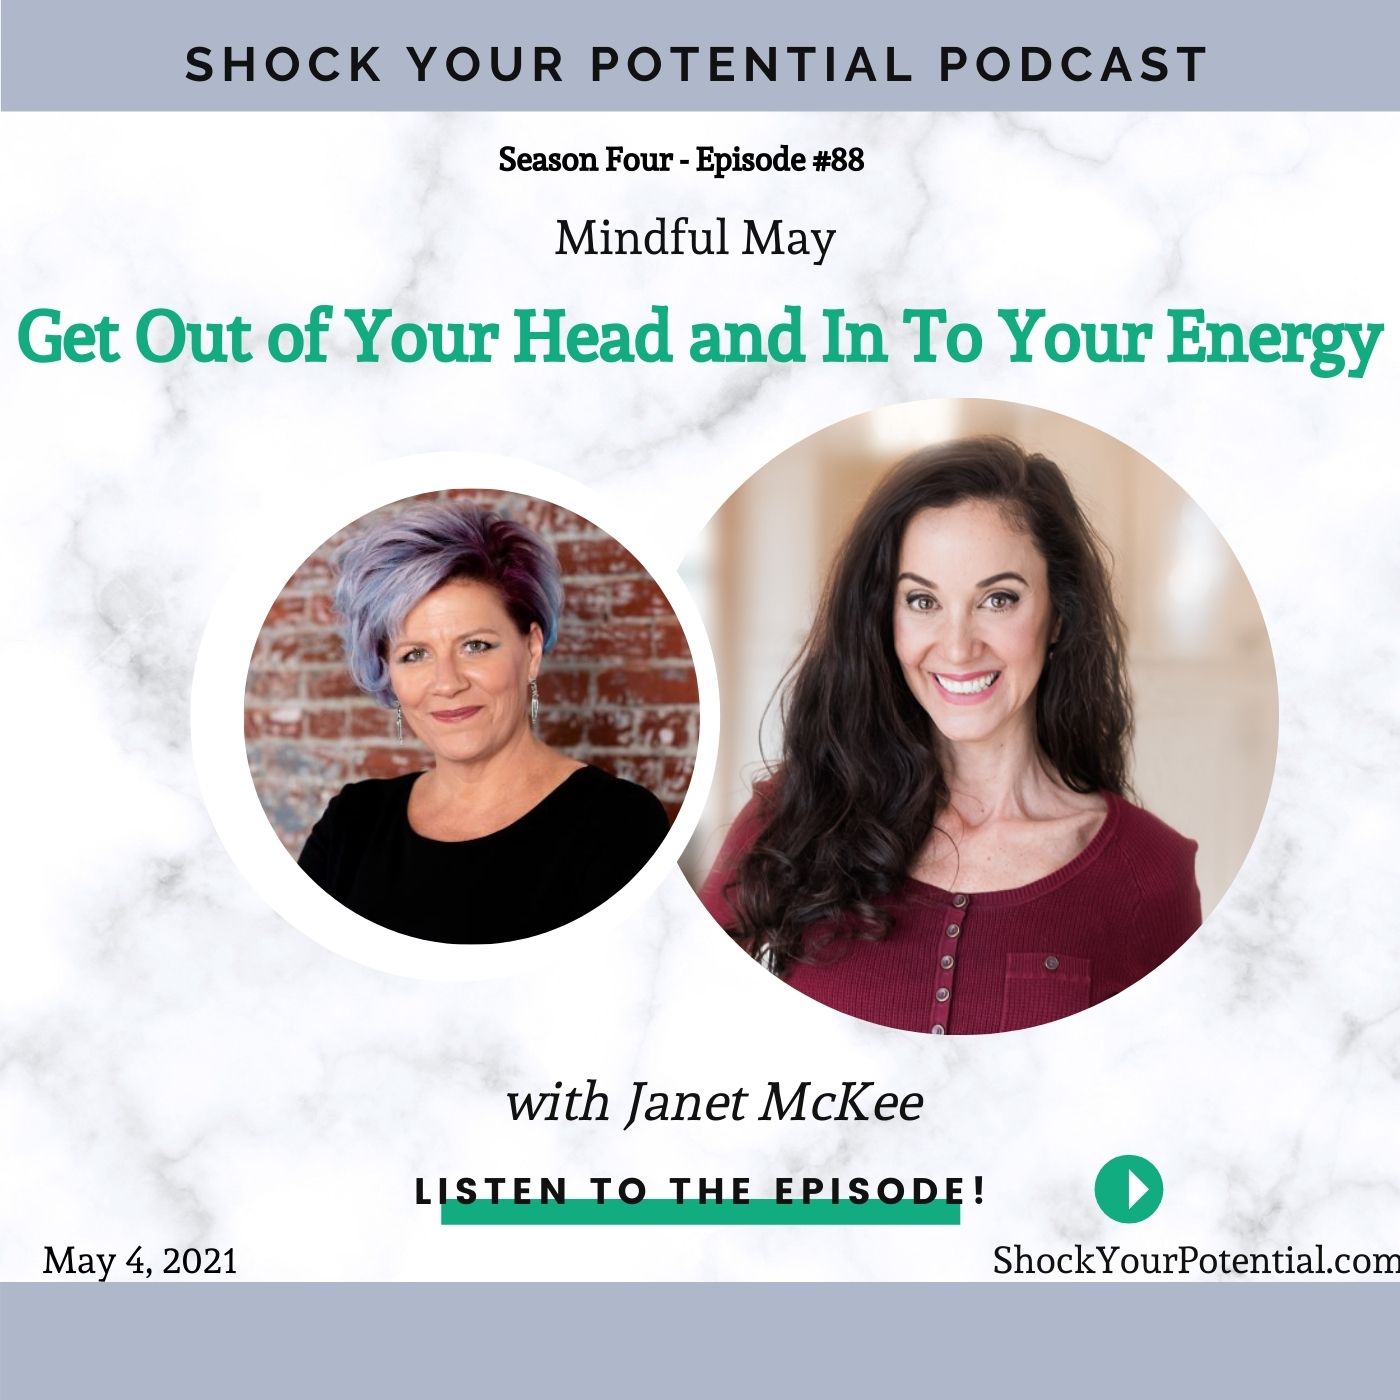 Get Out of Your Head and In To Your Energy – Janet McKee